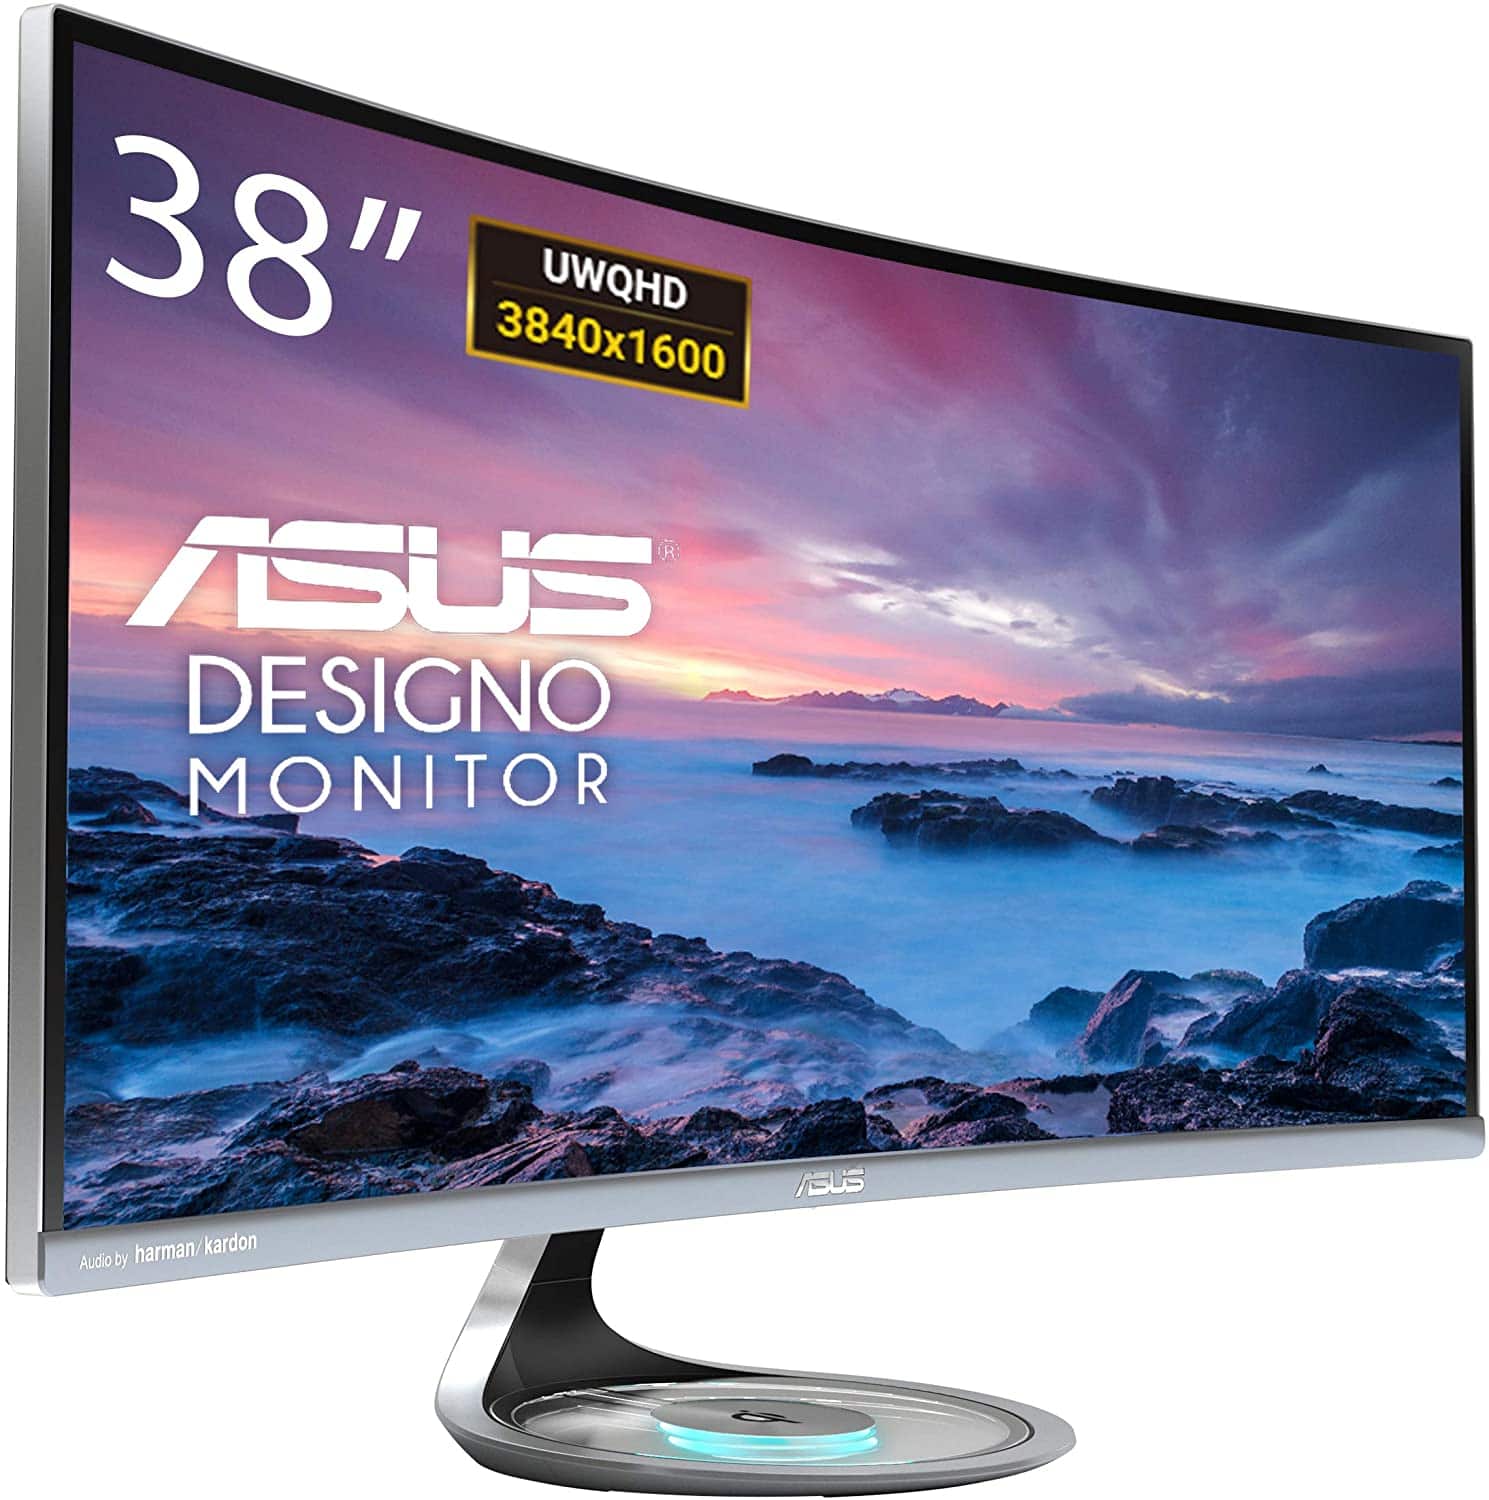 ASUS Designo Curve MX38VC 37.5 Monitor Uwqhd IPS Eye Care with Qi Charging, DP, HDMI, Adaptive-Sync, Space Gray + Black